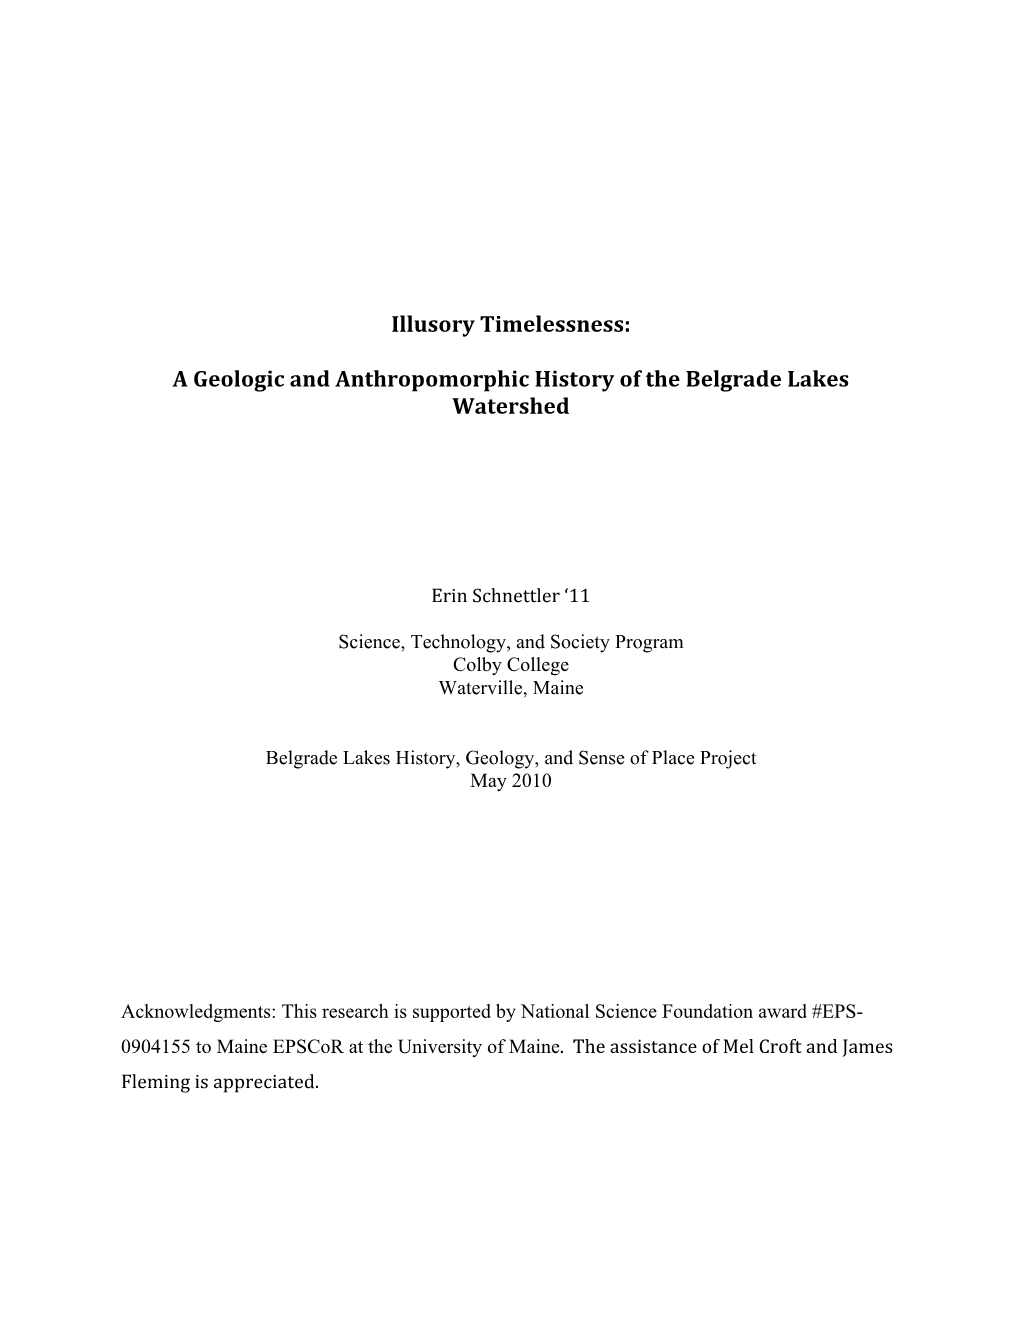 A Geologic and Anthropomorphic History of the Belgrade Lakes Watershed